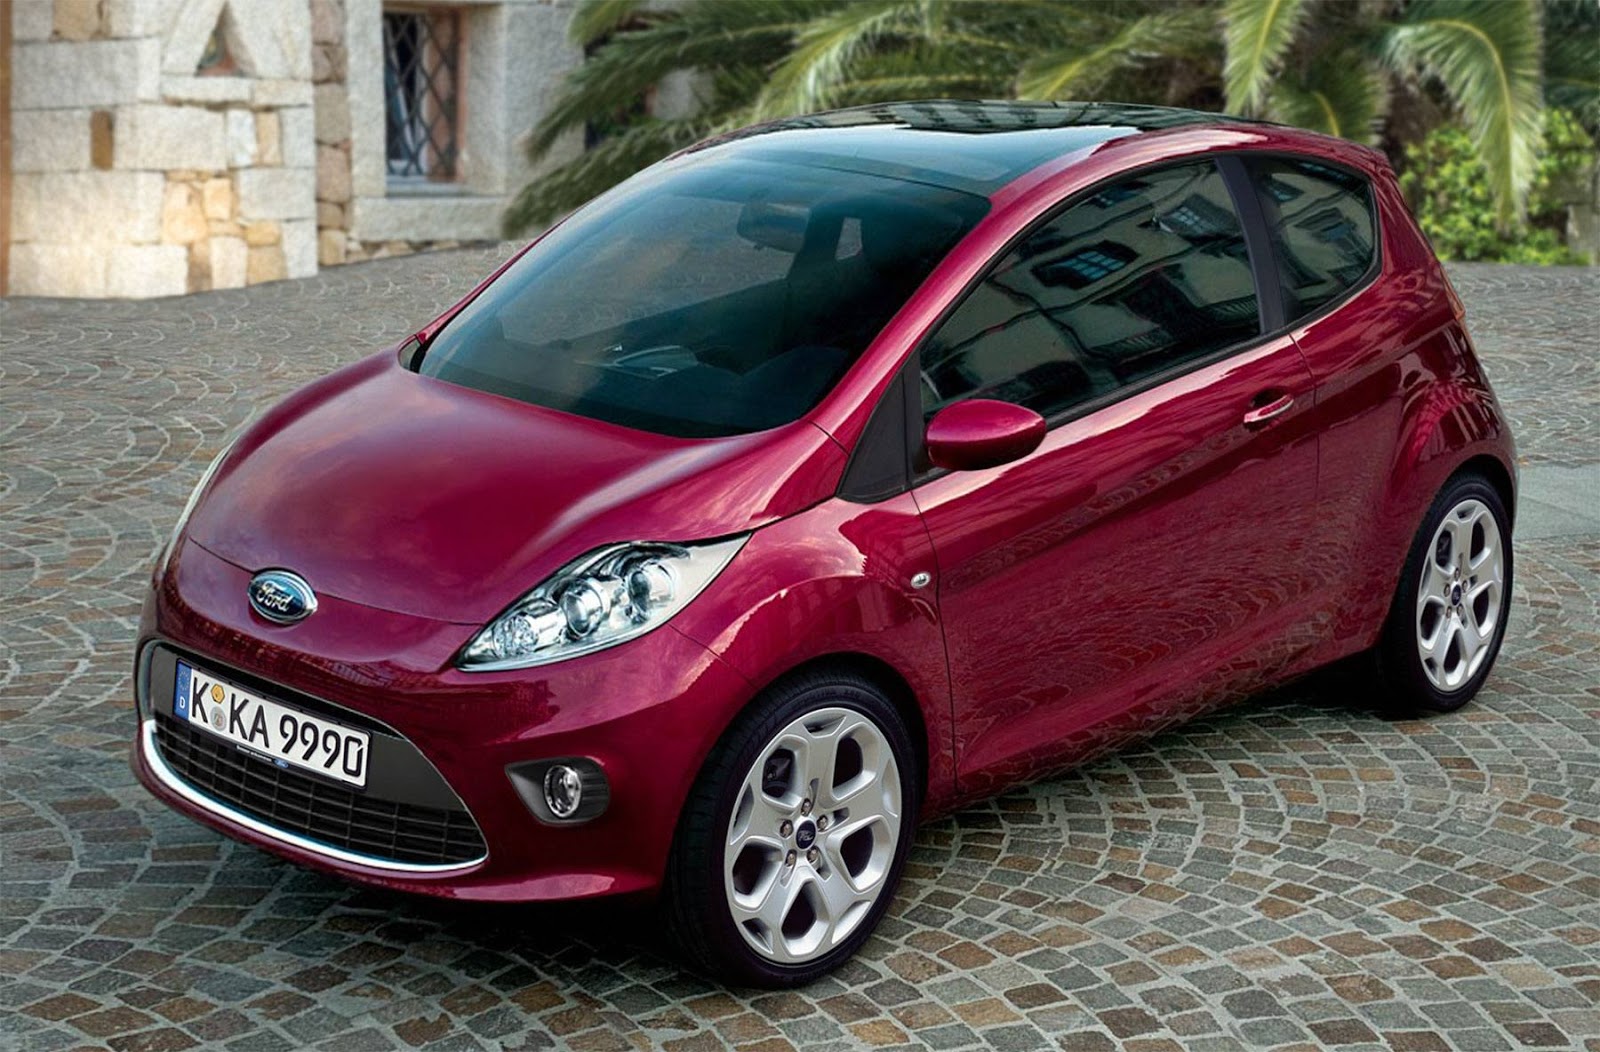 Beyond 6000 The new Ford KA... Boy I miss the URGLY